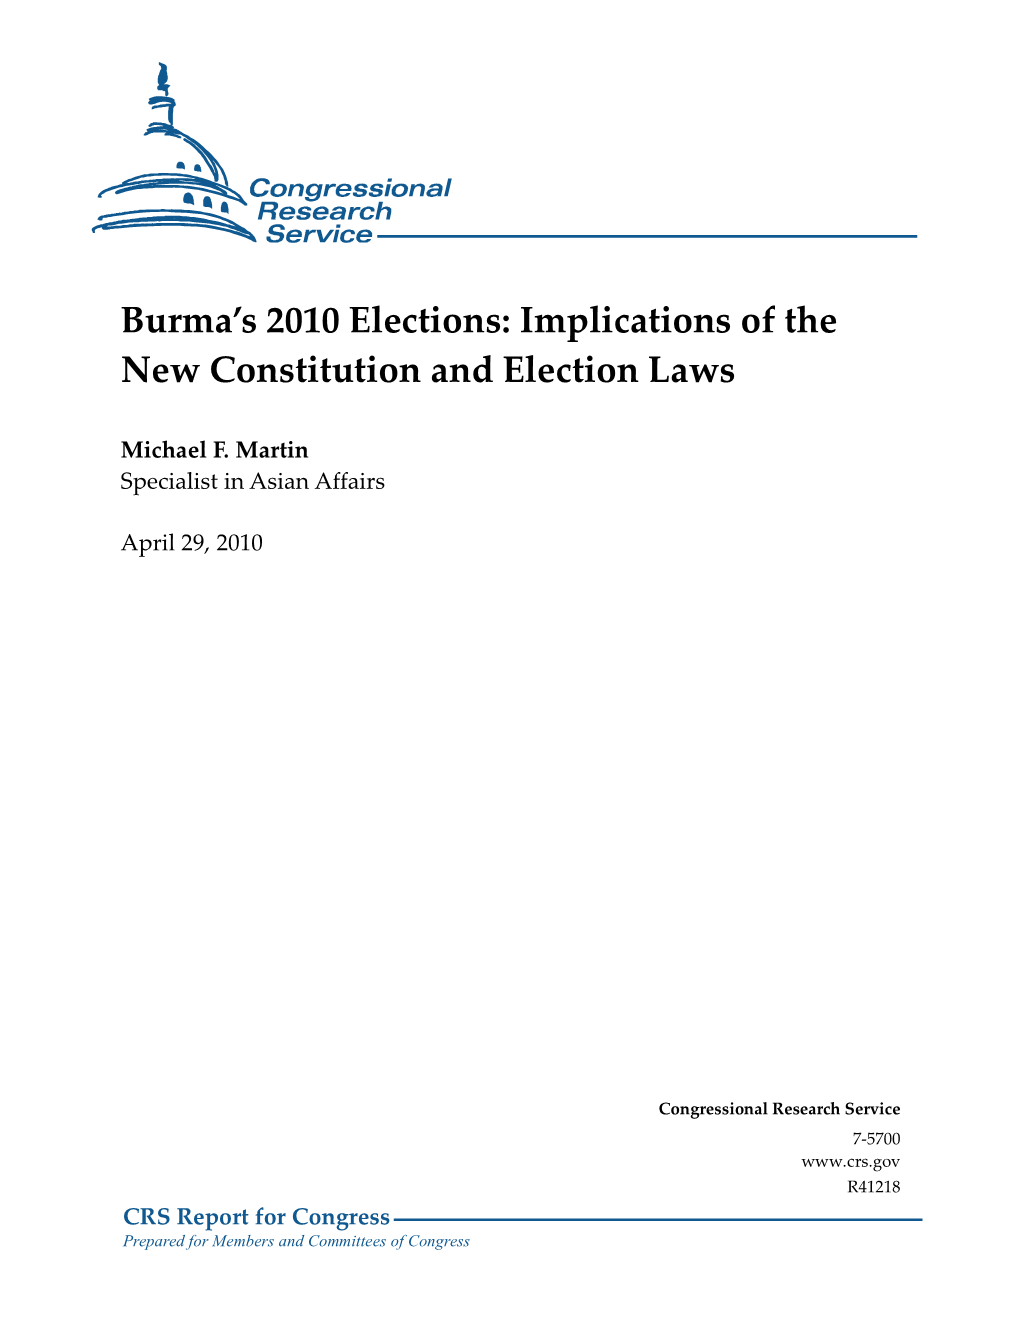 Burma's 2010 Elections: Implications of the New Constitution and Election Laws